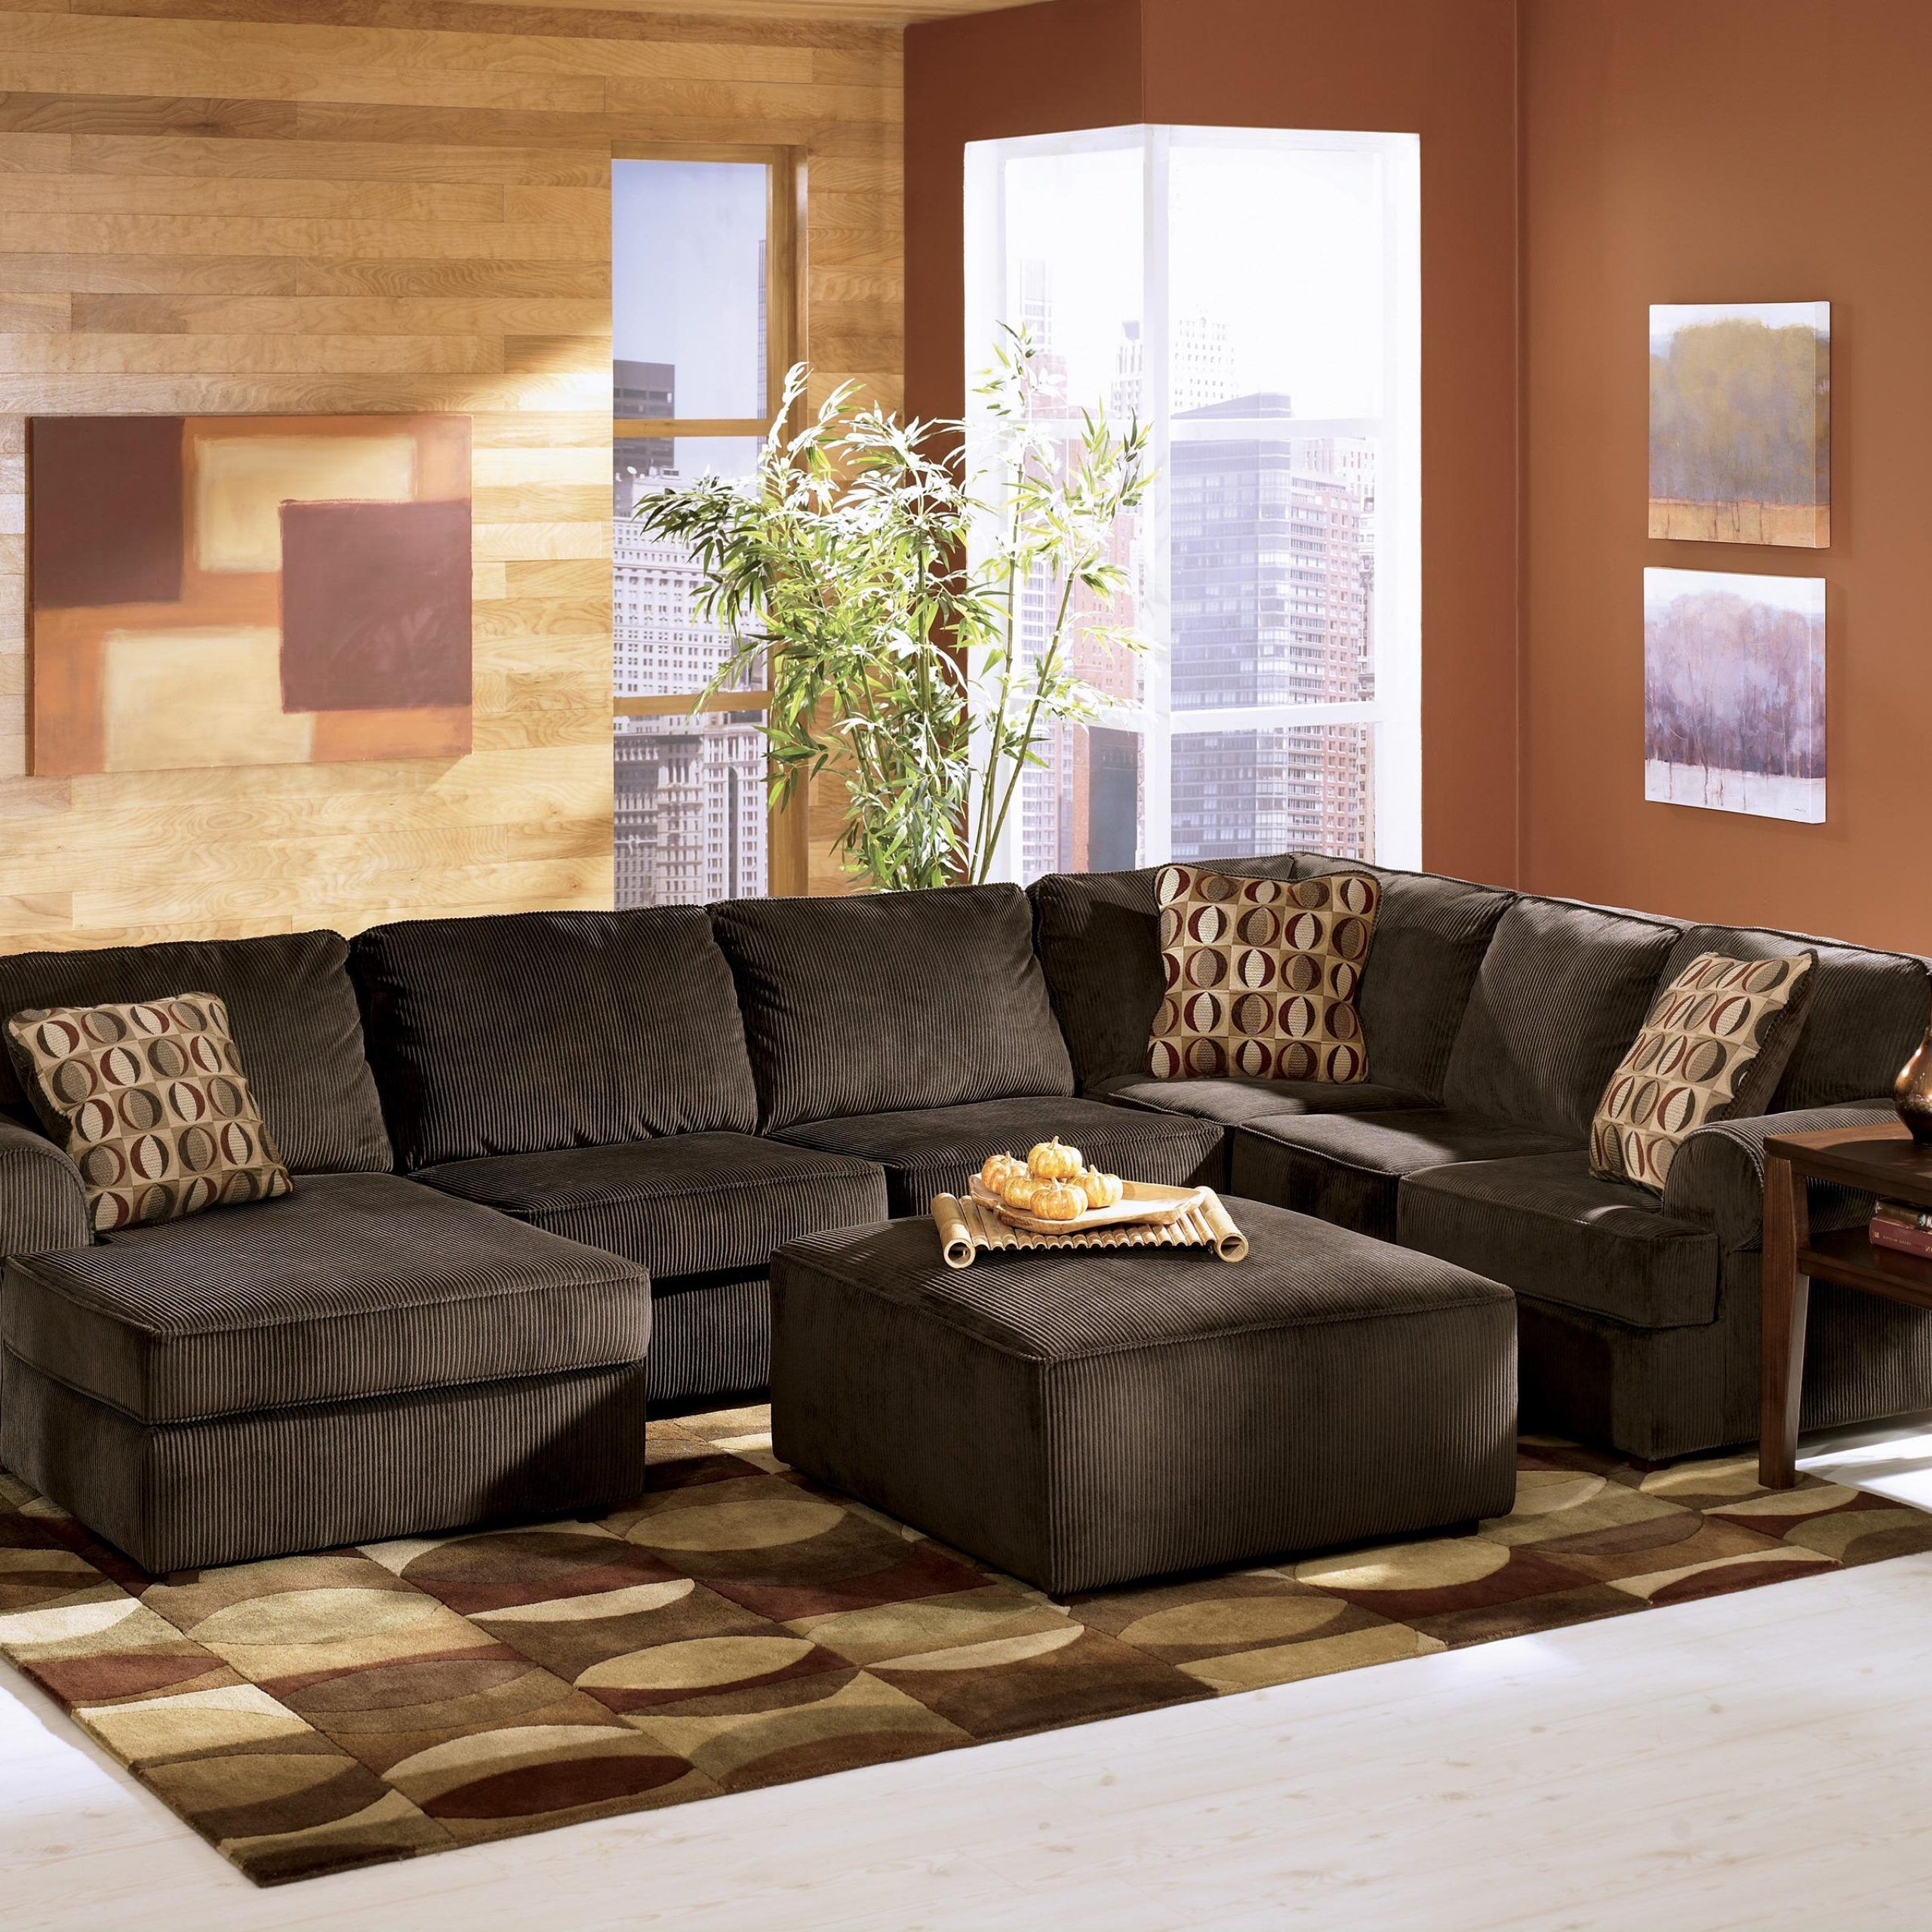 2pc Luxurious And Plush Corduroy Sectional Sofas Brown Inside Recent Vista – Chocolate (68404)ashley Furniture – Del Sol (View 12 of 25)